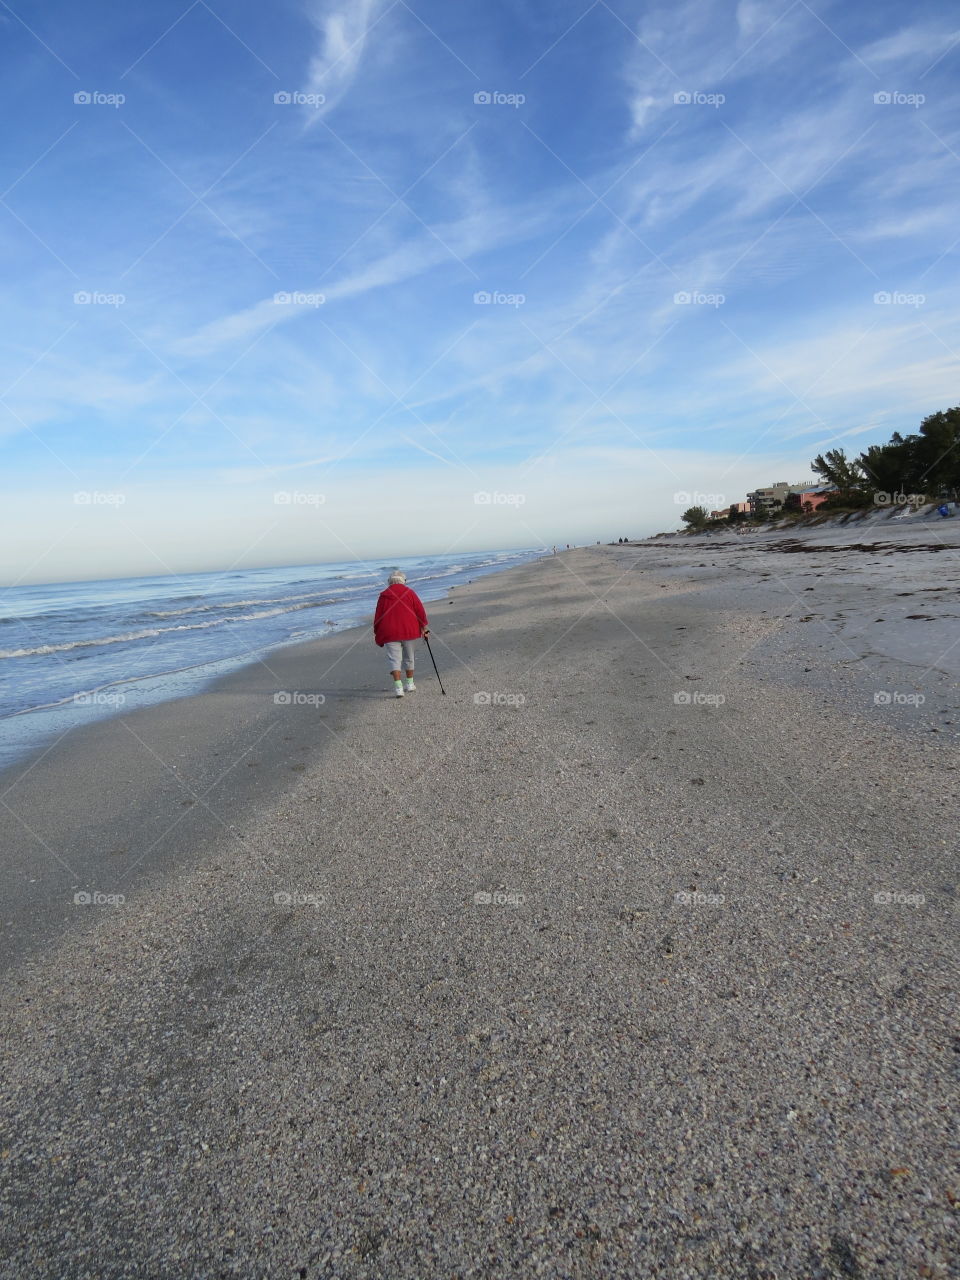 Your never too old to enjoy the simplicity of life.  Early morning walk and collecting shells. Good for all ages.